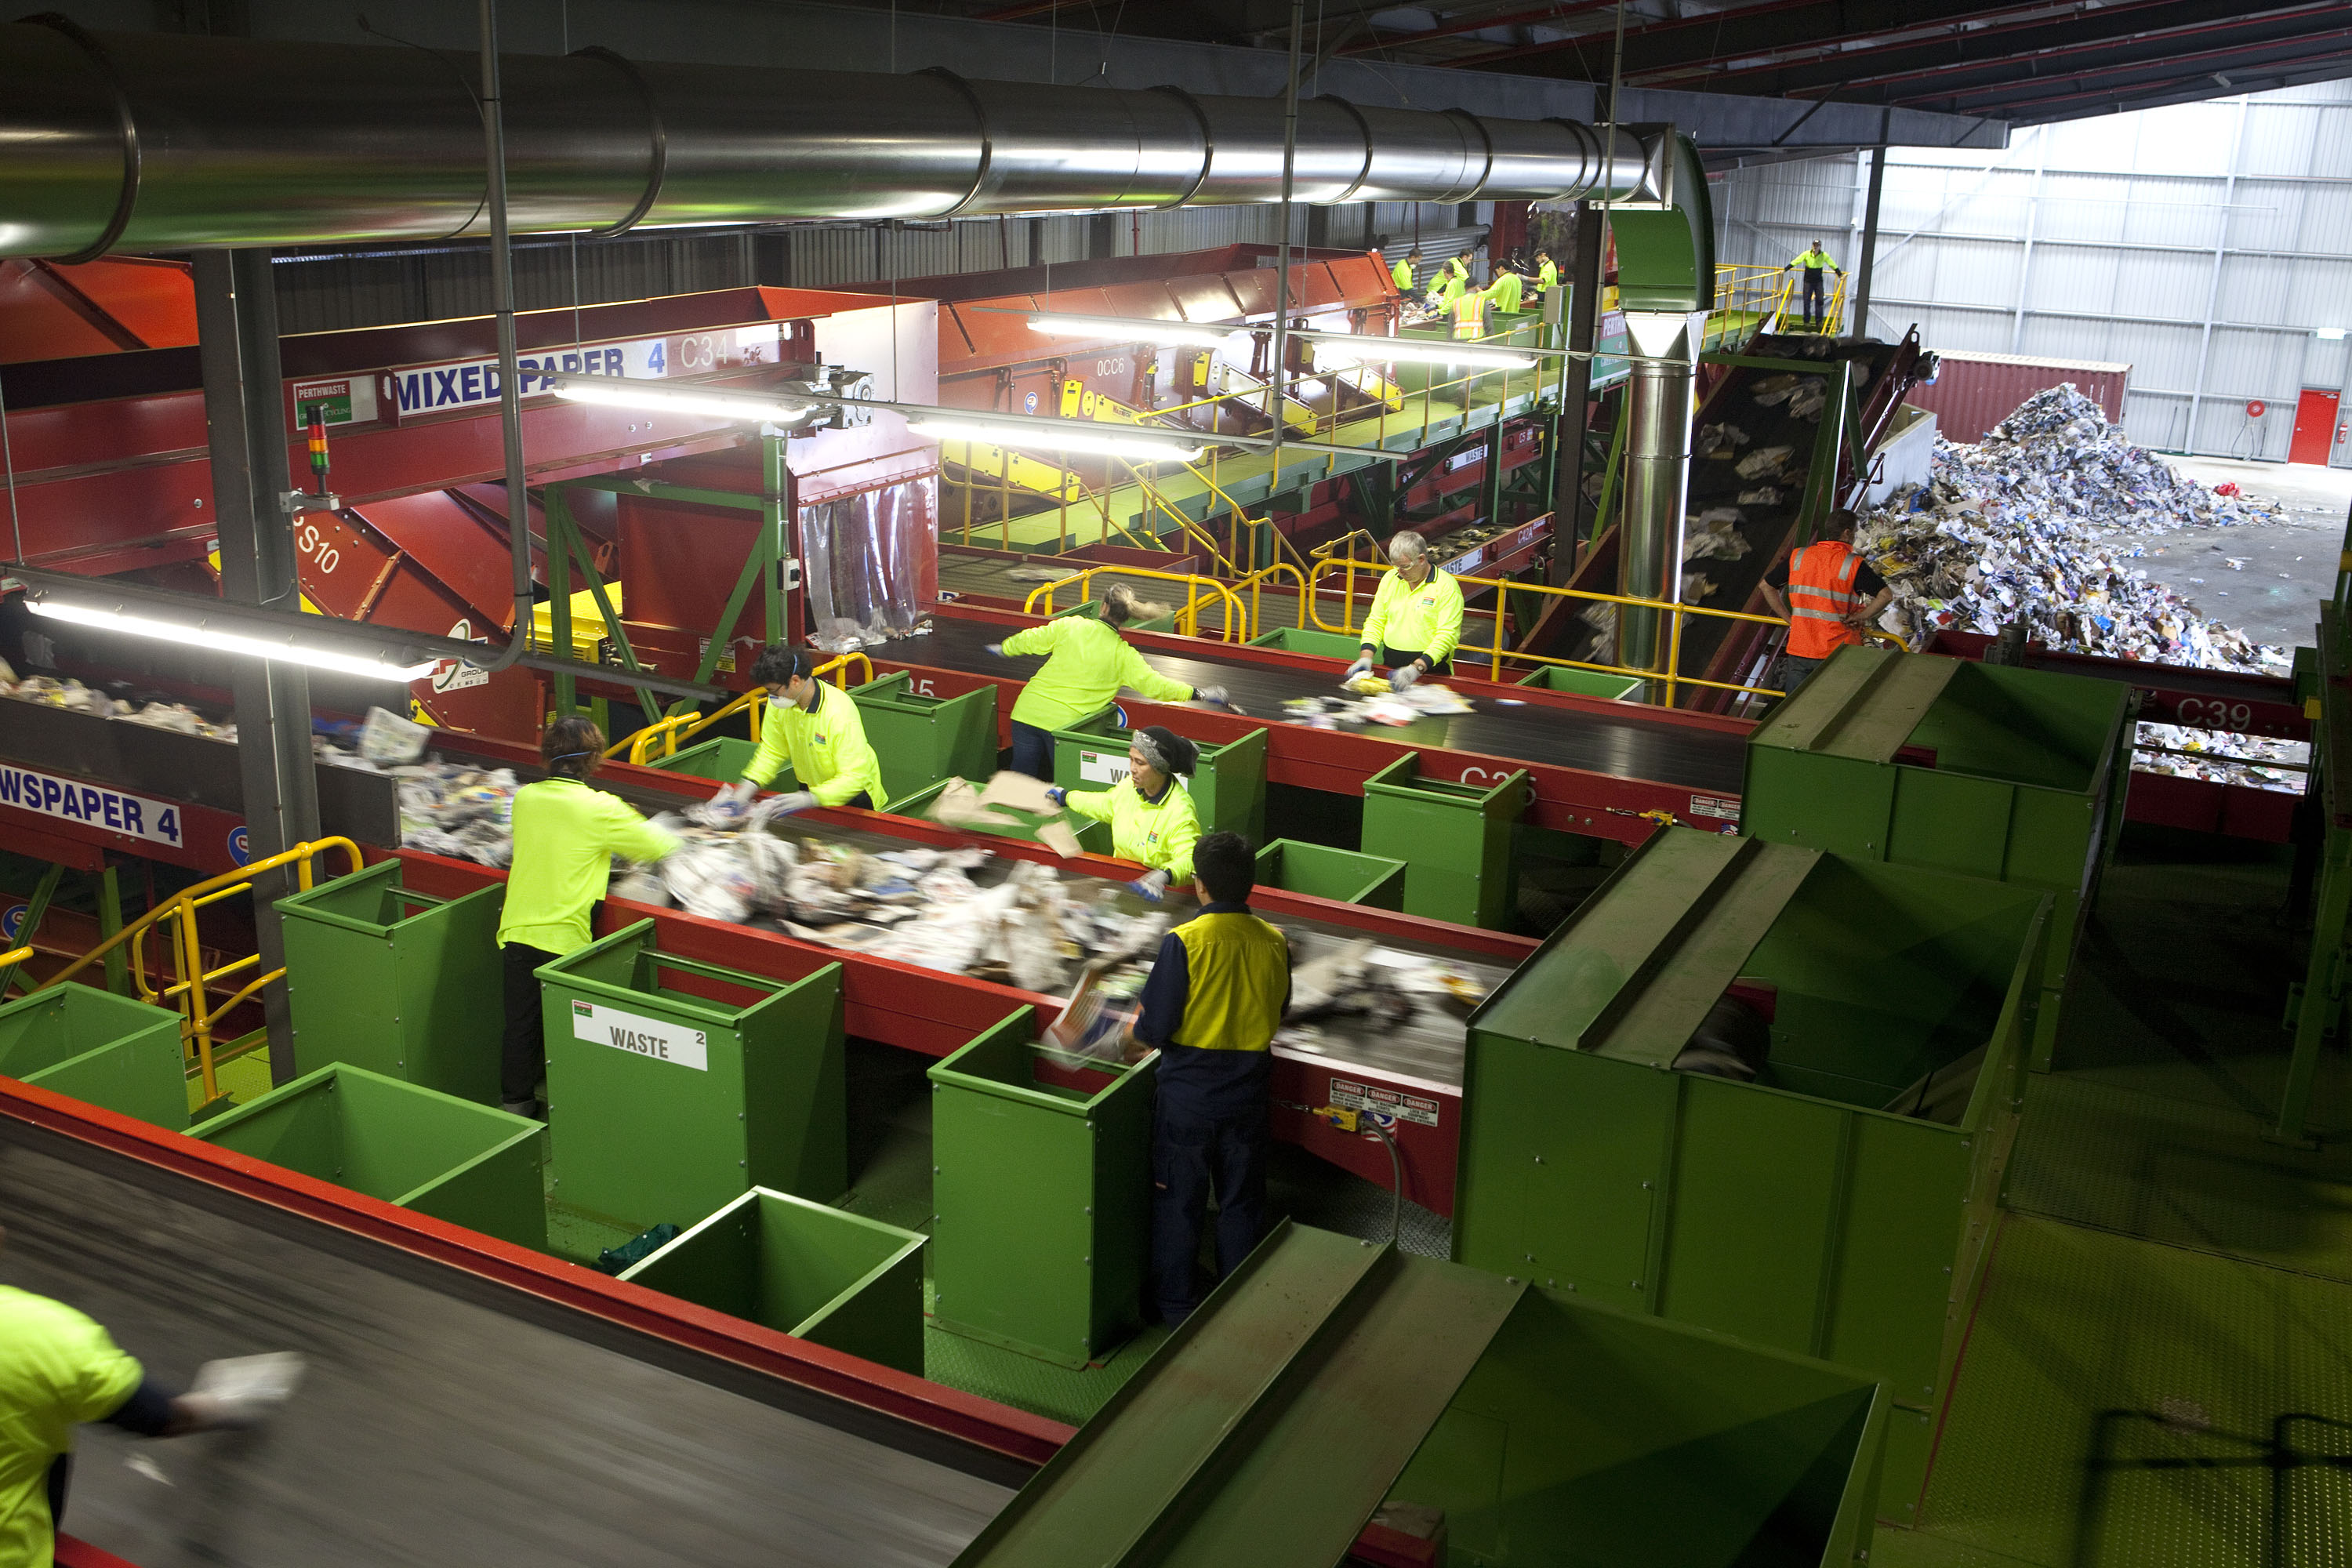 Works sorting rubbish in a Materials Recovery Facility